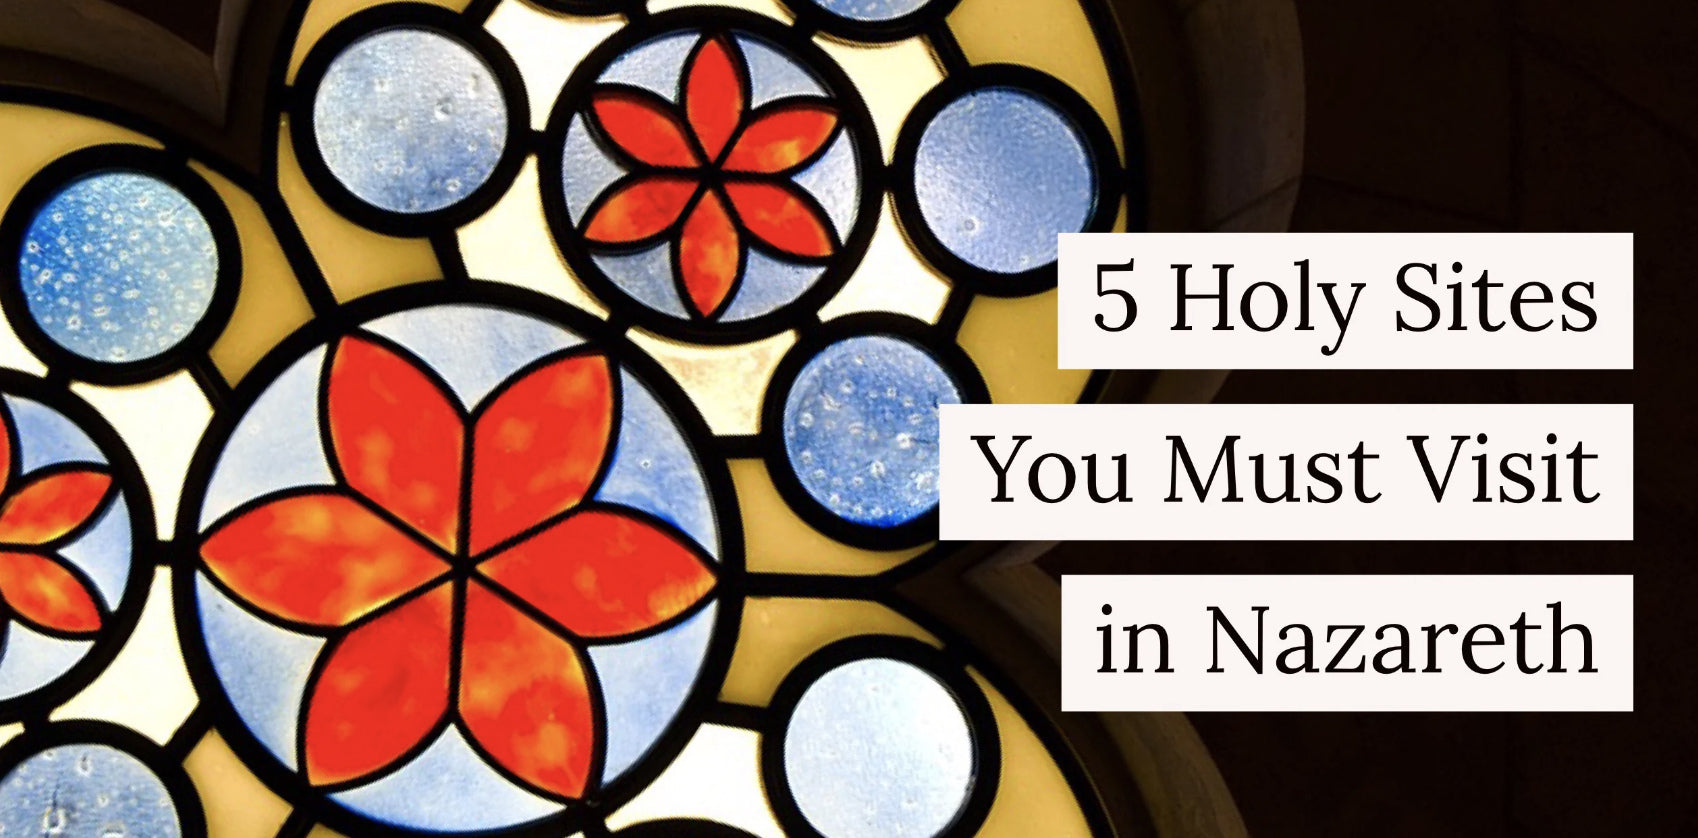 5 Holy Sites You Must Visit in Nazareth When Traveling to the Holy Land